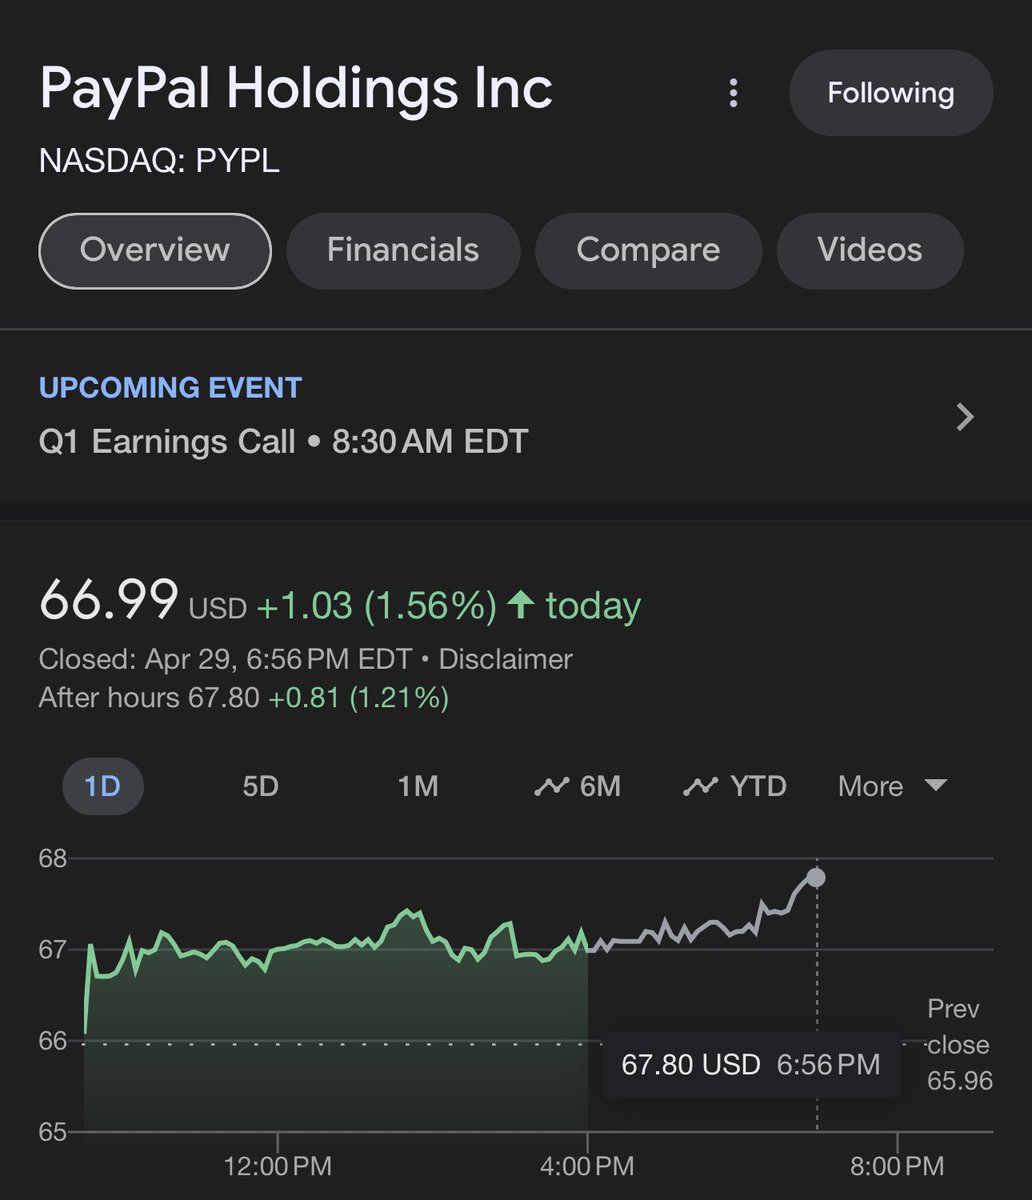 PAYPAL IS HITTING NEW YEARLY HIGHS AFTER HOURS PAYPAL REORTS EARNINGS TOMORROW MORNING $PYPL